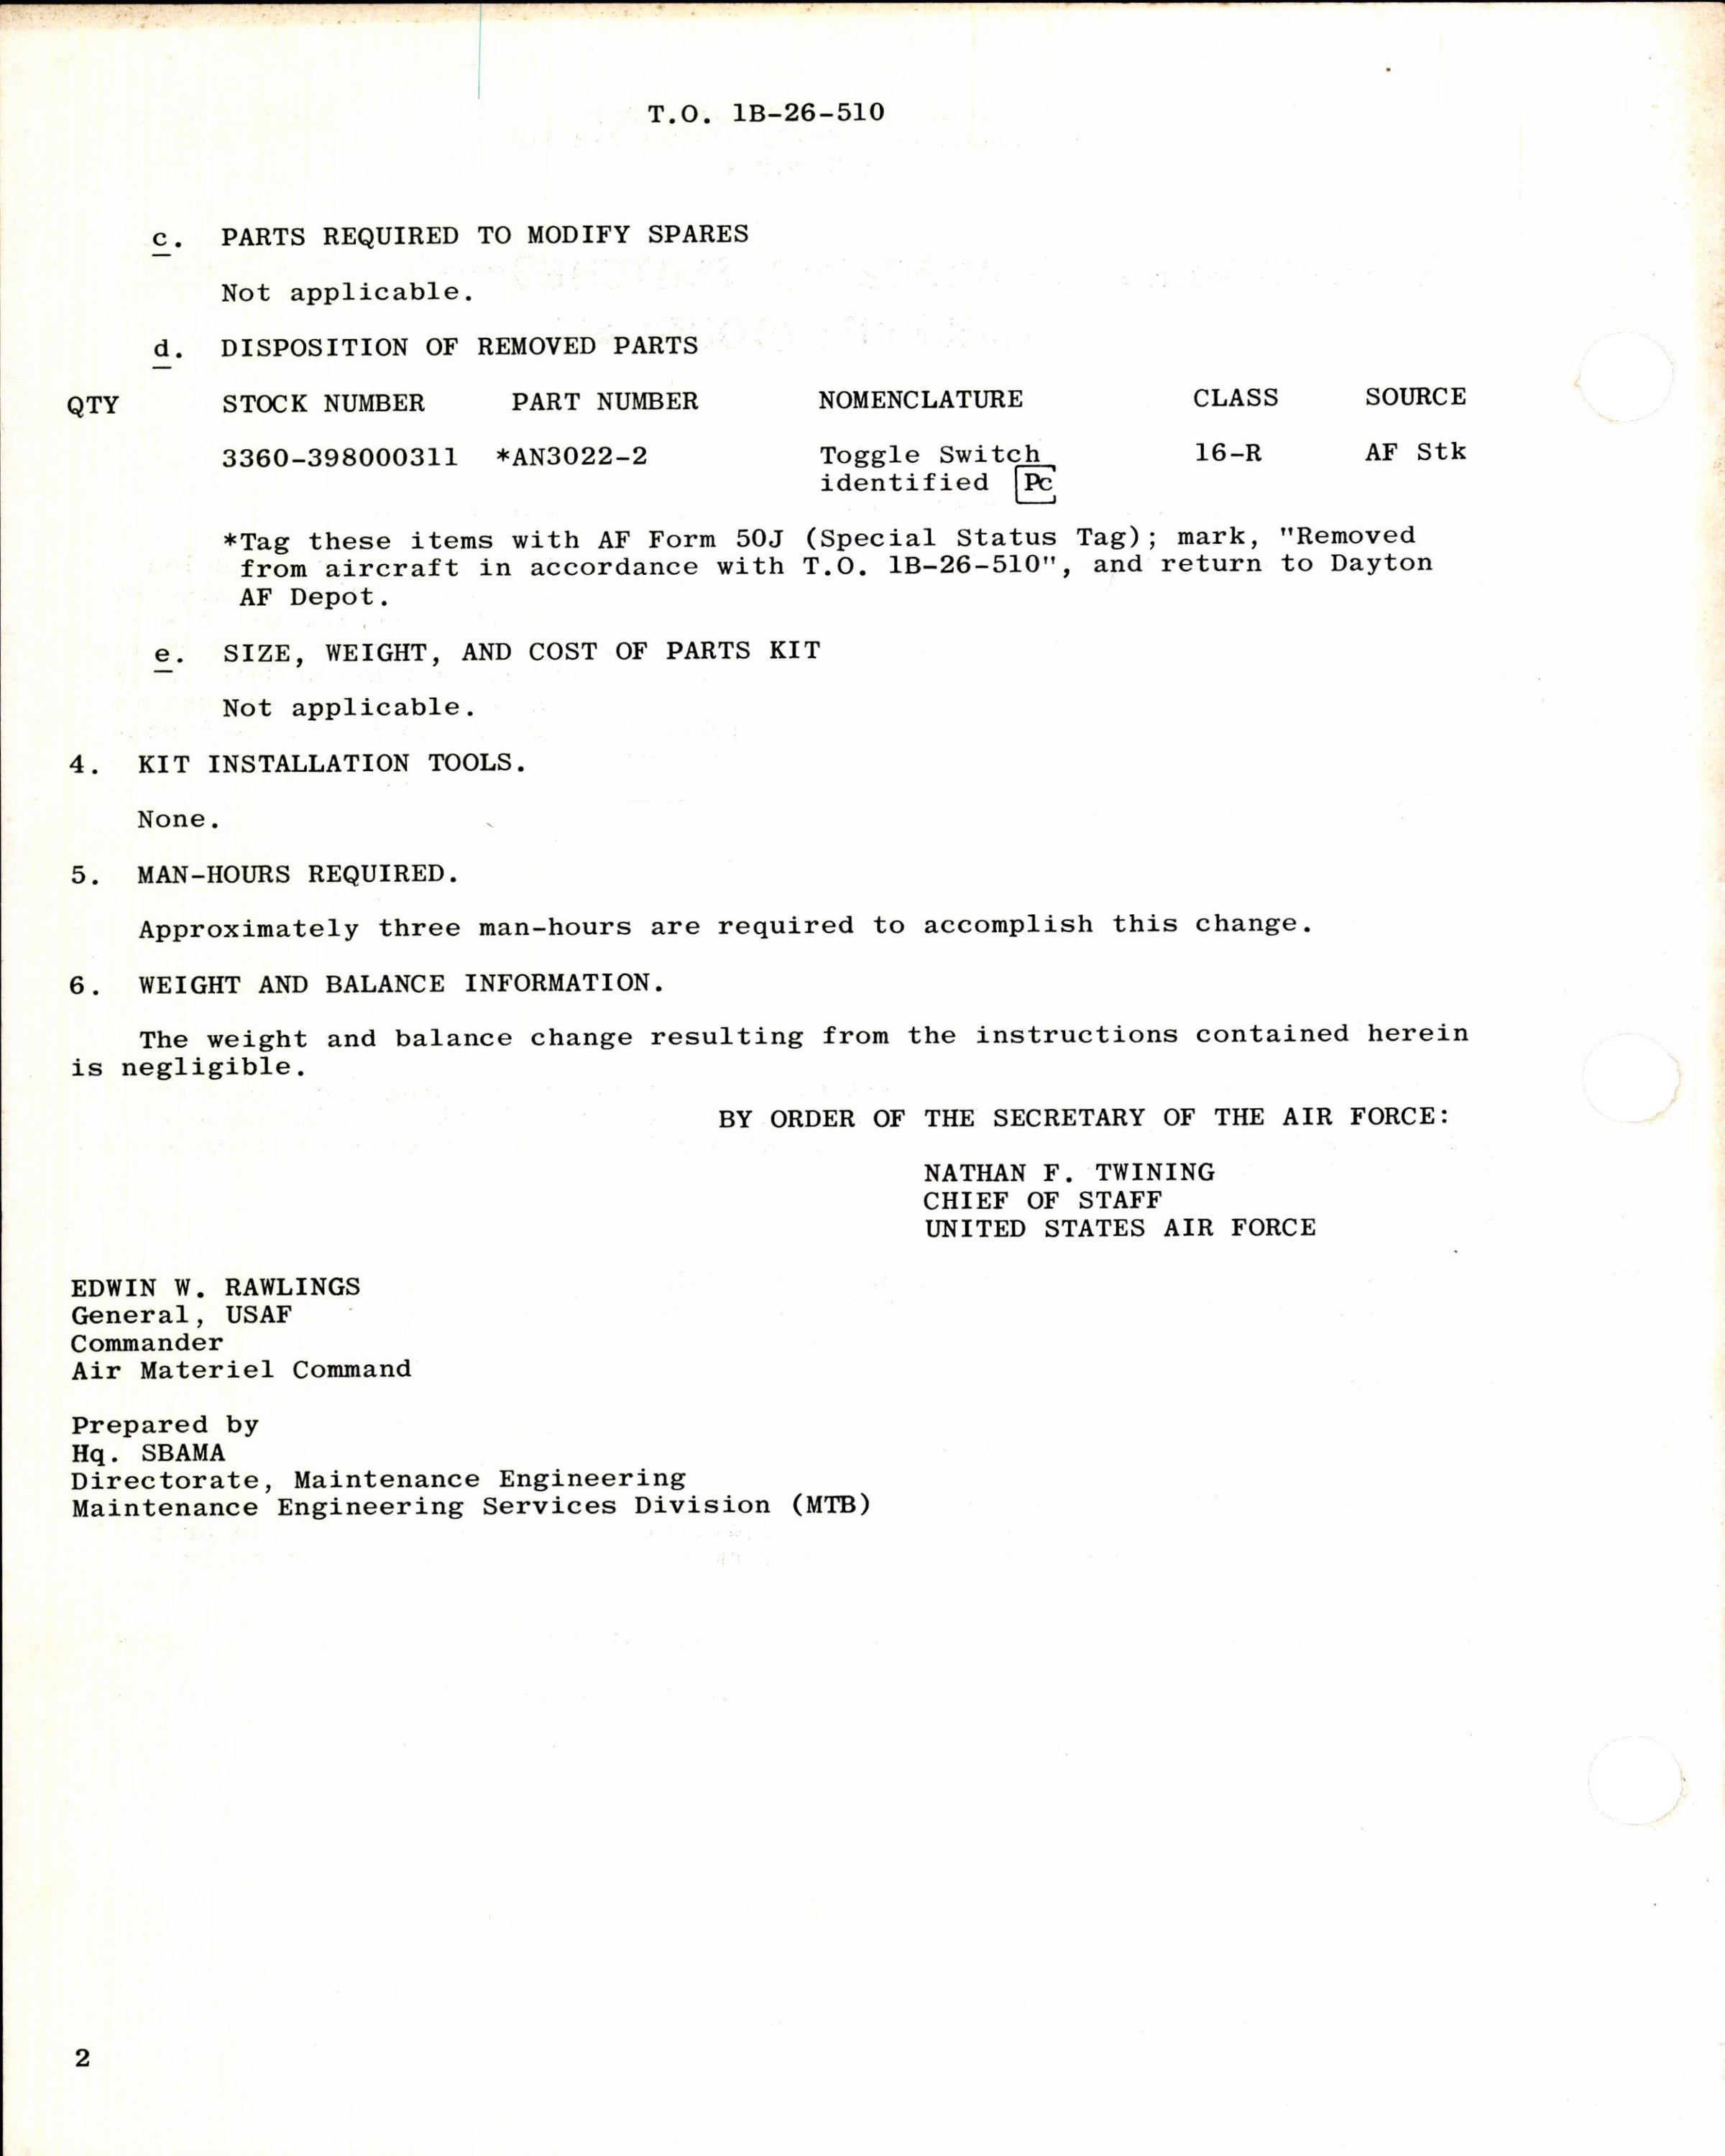 Sample page 2 from AirCorps Library document: Replacement of AN3022-2 Switches for B-26 Series Aircraft